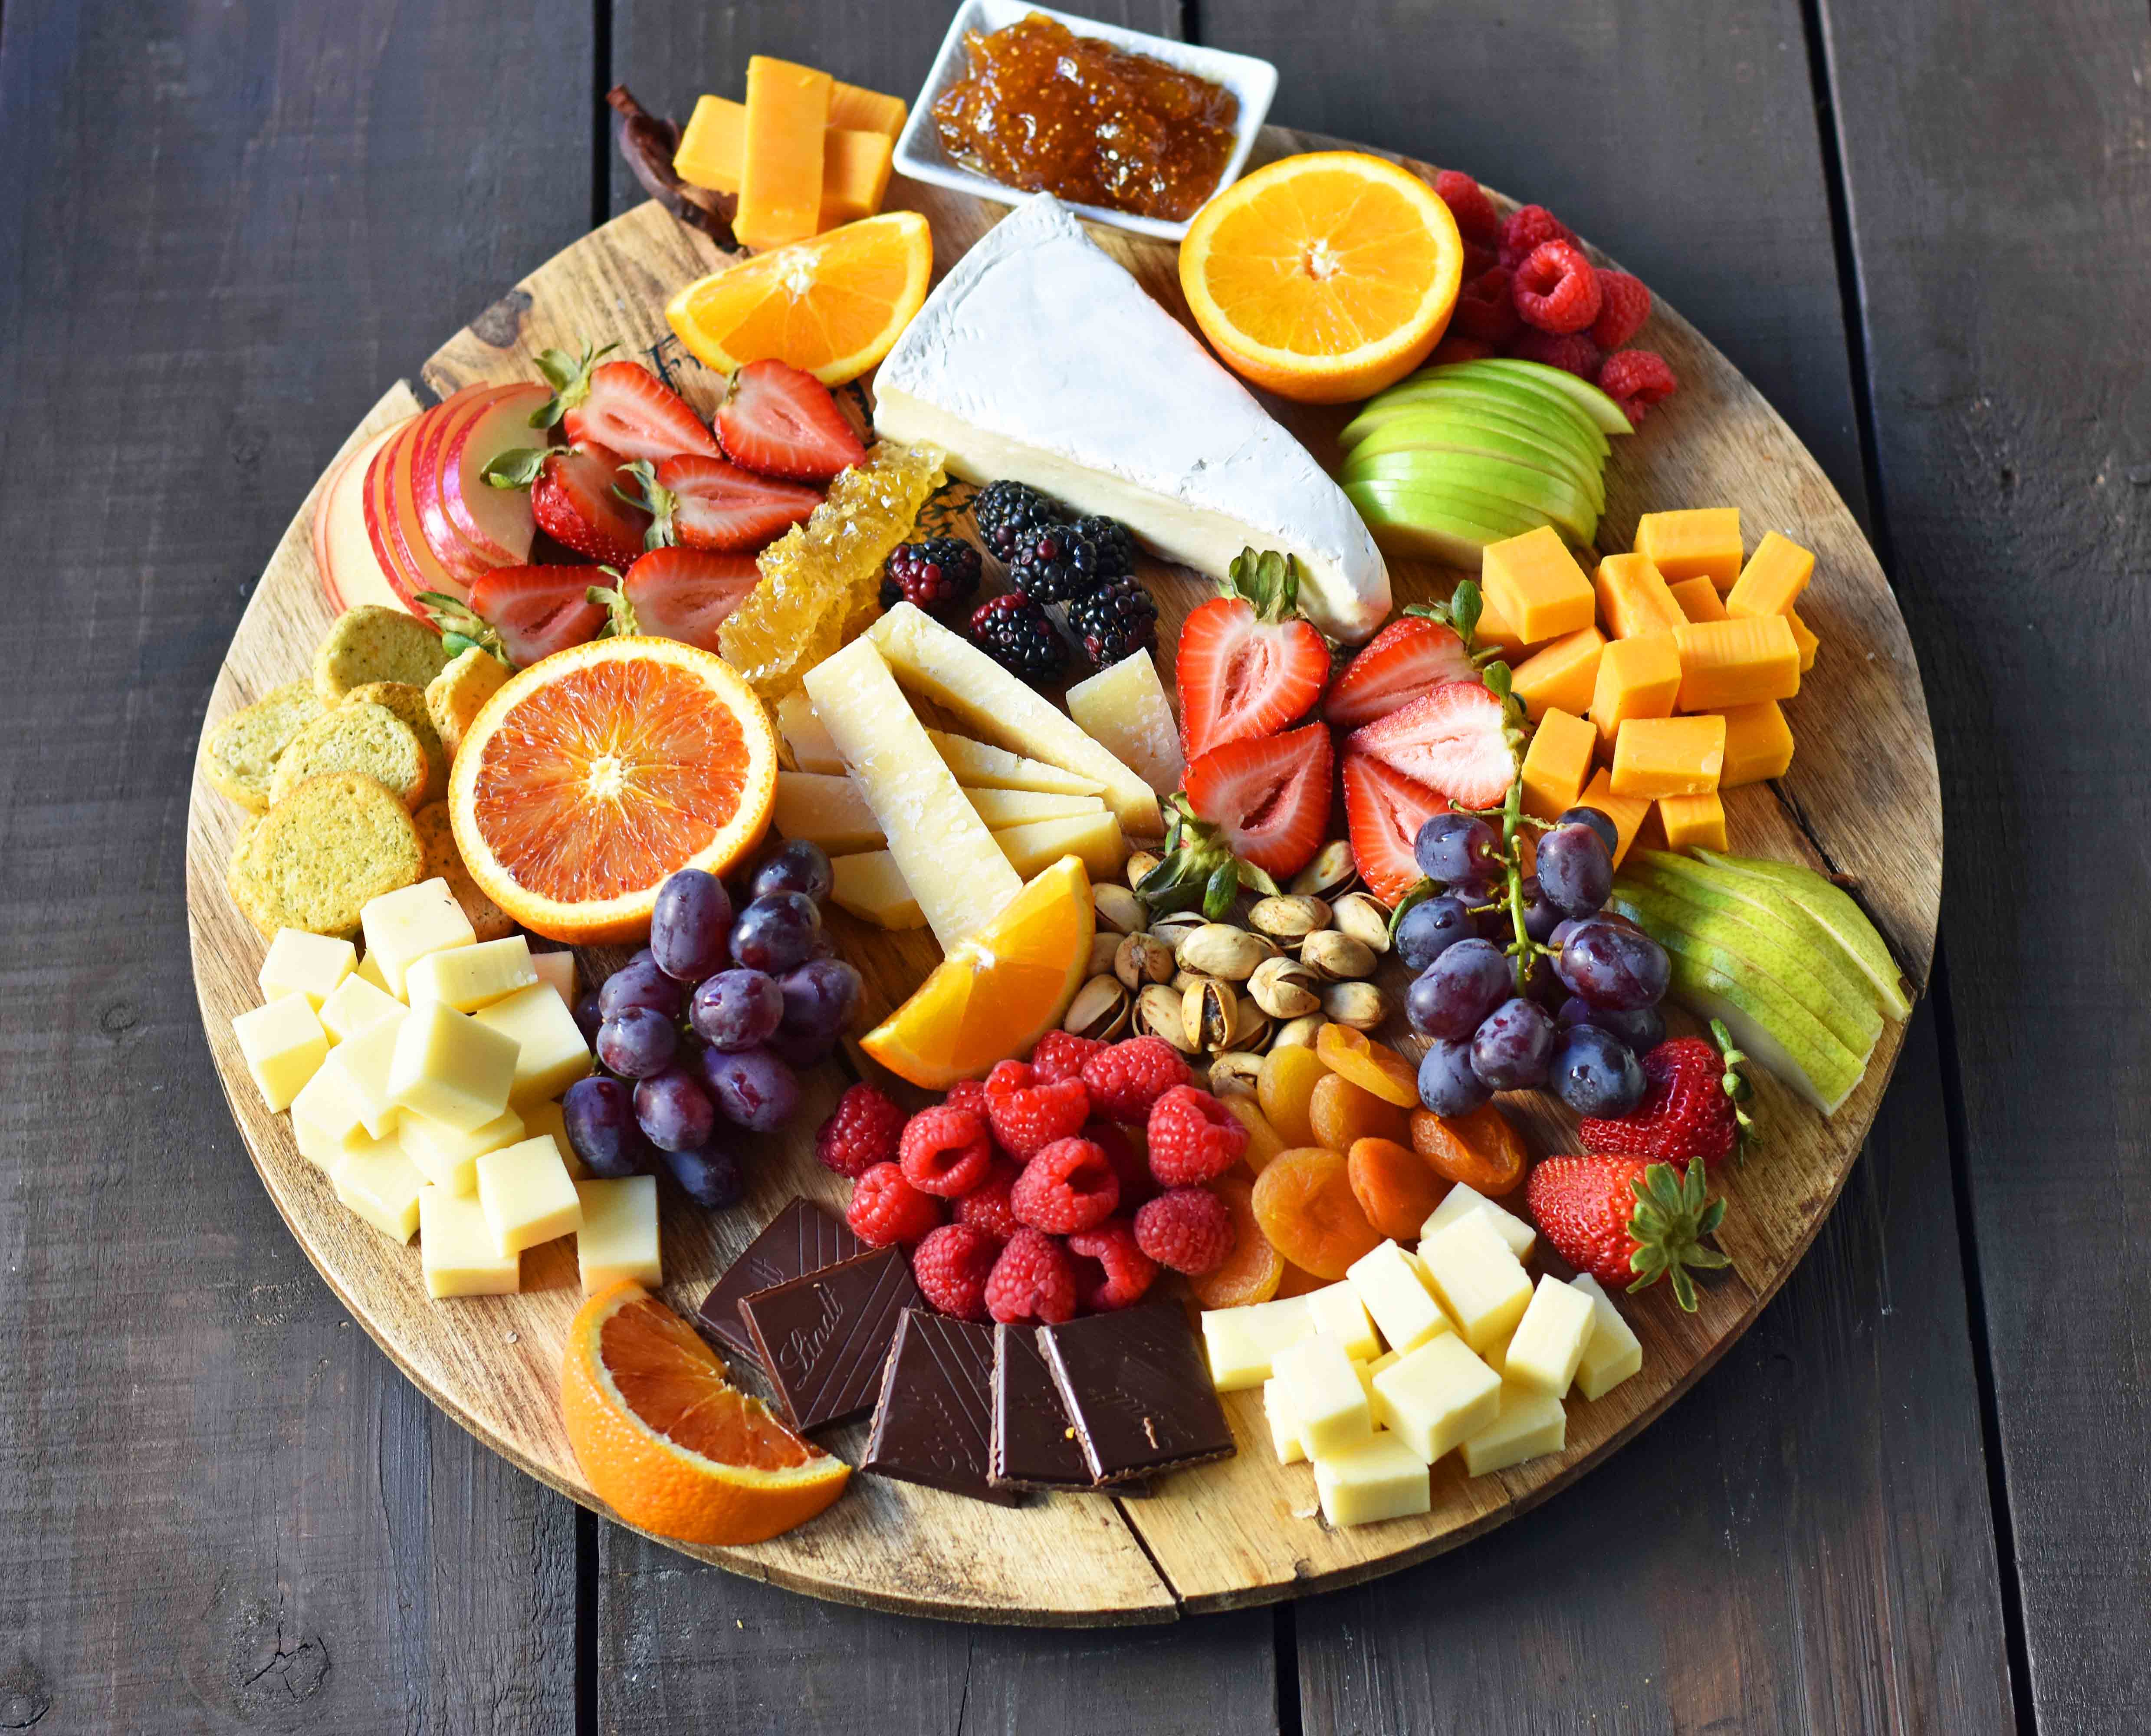 How to make the BEST Fruit and Cheese Board. How to make a cheese plate. Ideas on how to make a cheese tray. www.modernhoney.com